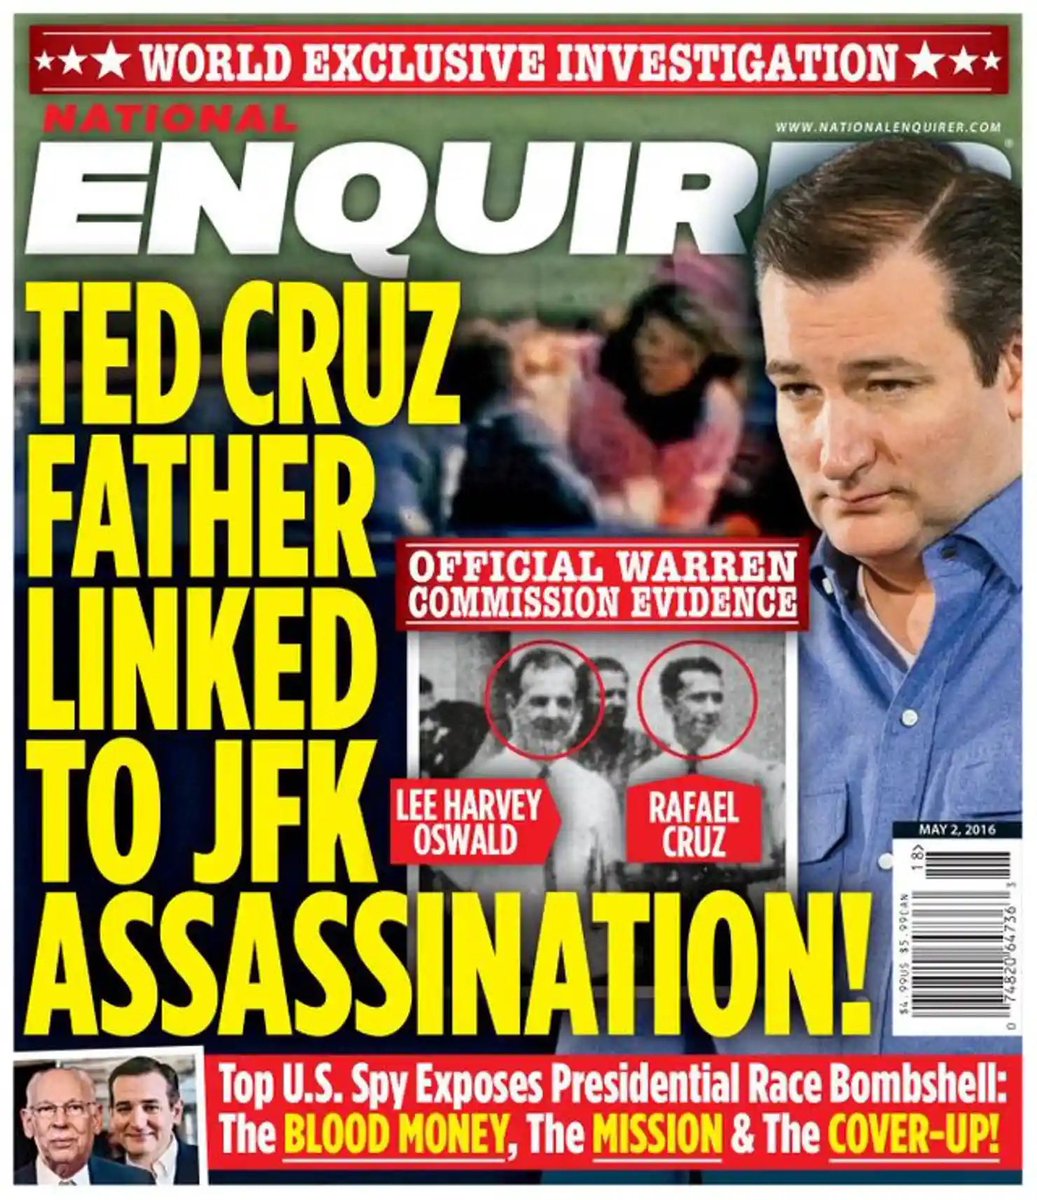 @SenTedCruz Your dad was NATIONALLY ridiculed with the SAME David Pecker election scheme. Your dad must be so proud of you, Ted.